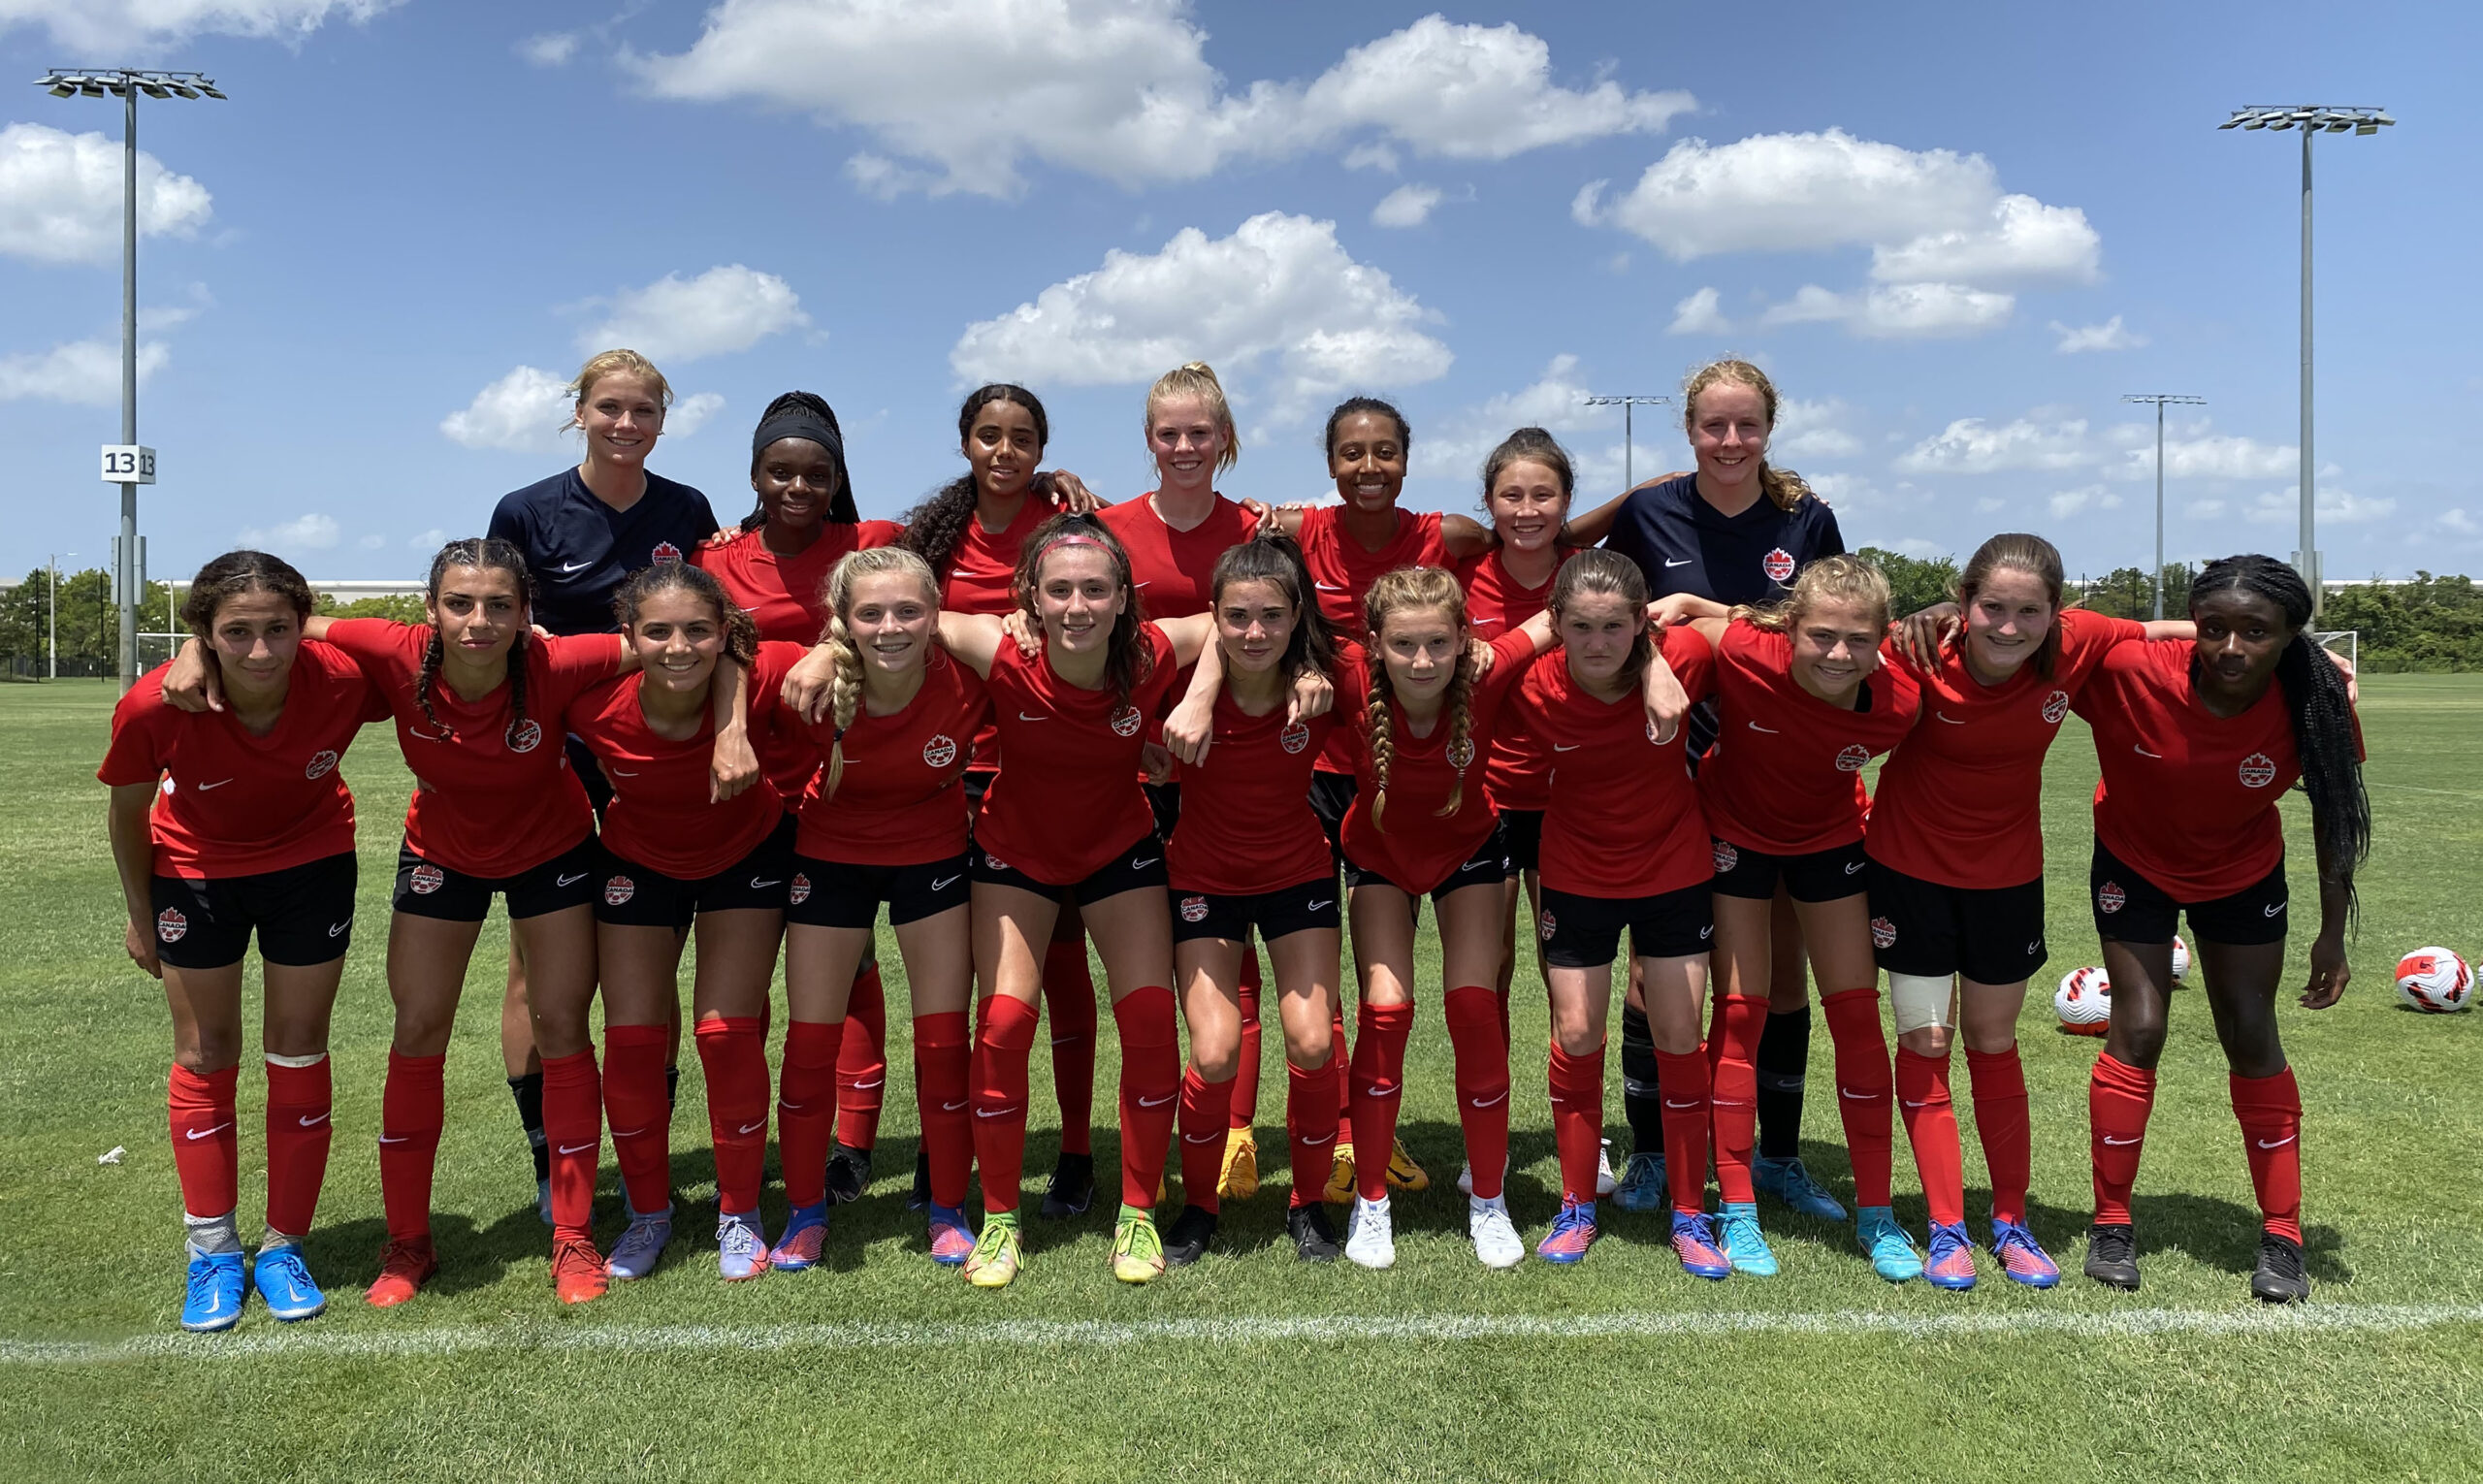 Canada won 4:1 over Puerto Rico at the Concacaf Girls’ Under-15 Championship